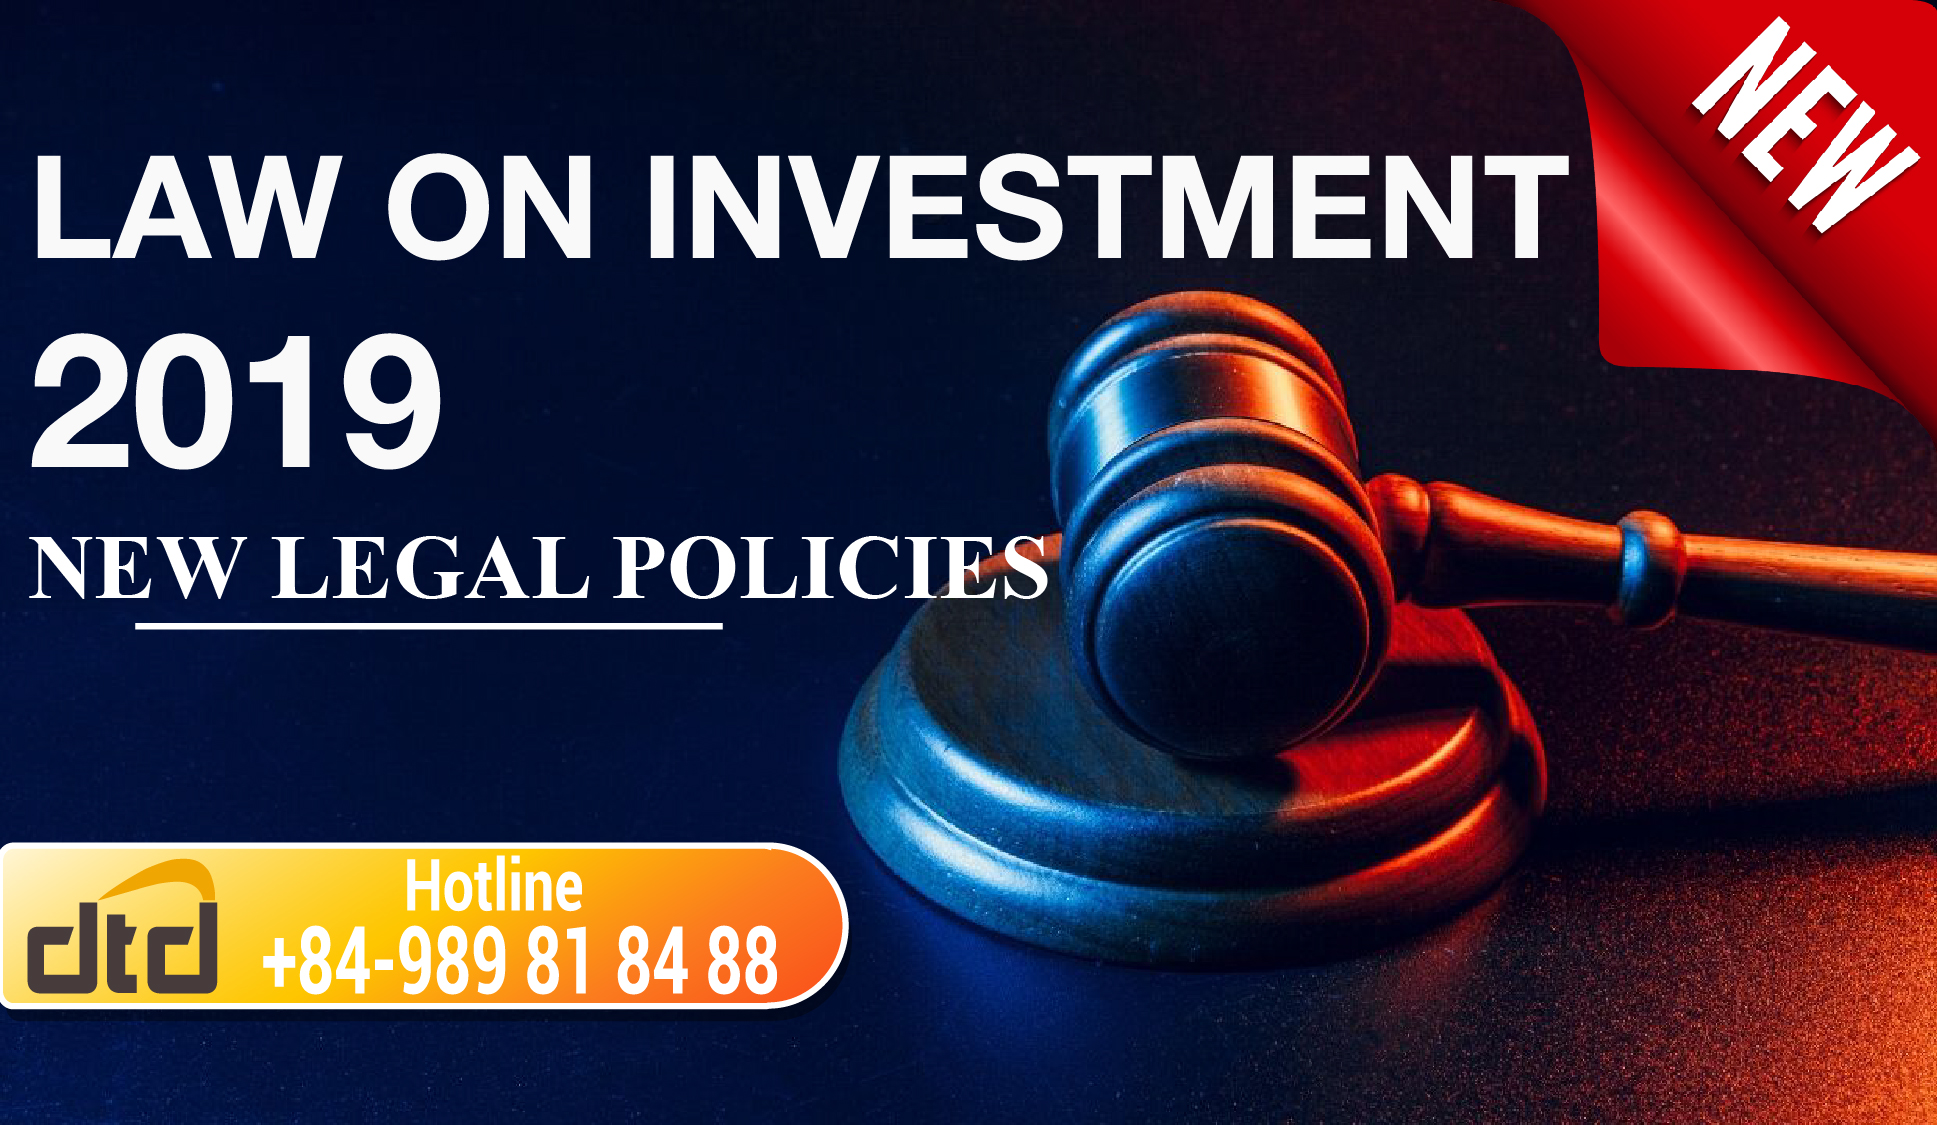 NEW LEGAL POLICIES OF LAW ON INVESTMENT 2019